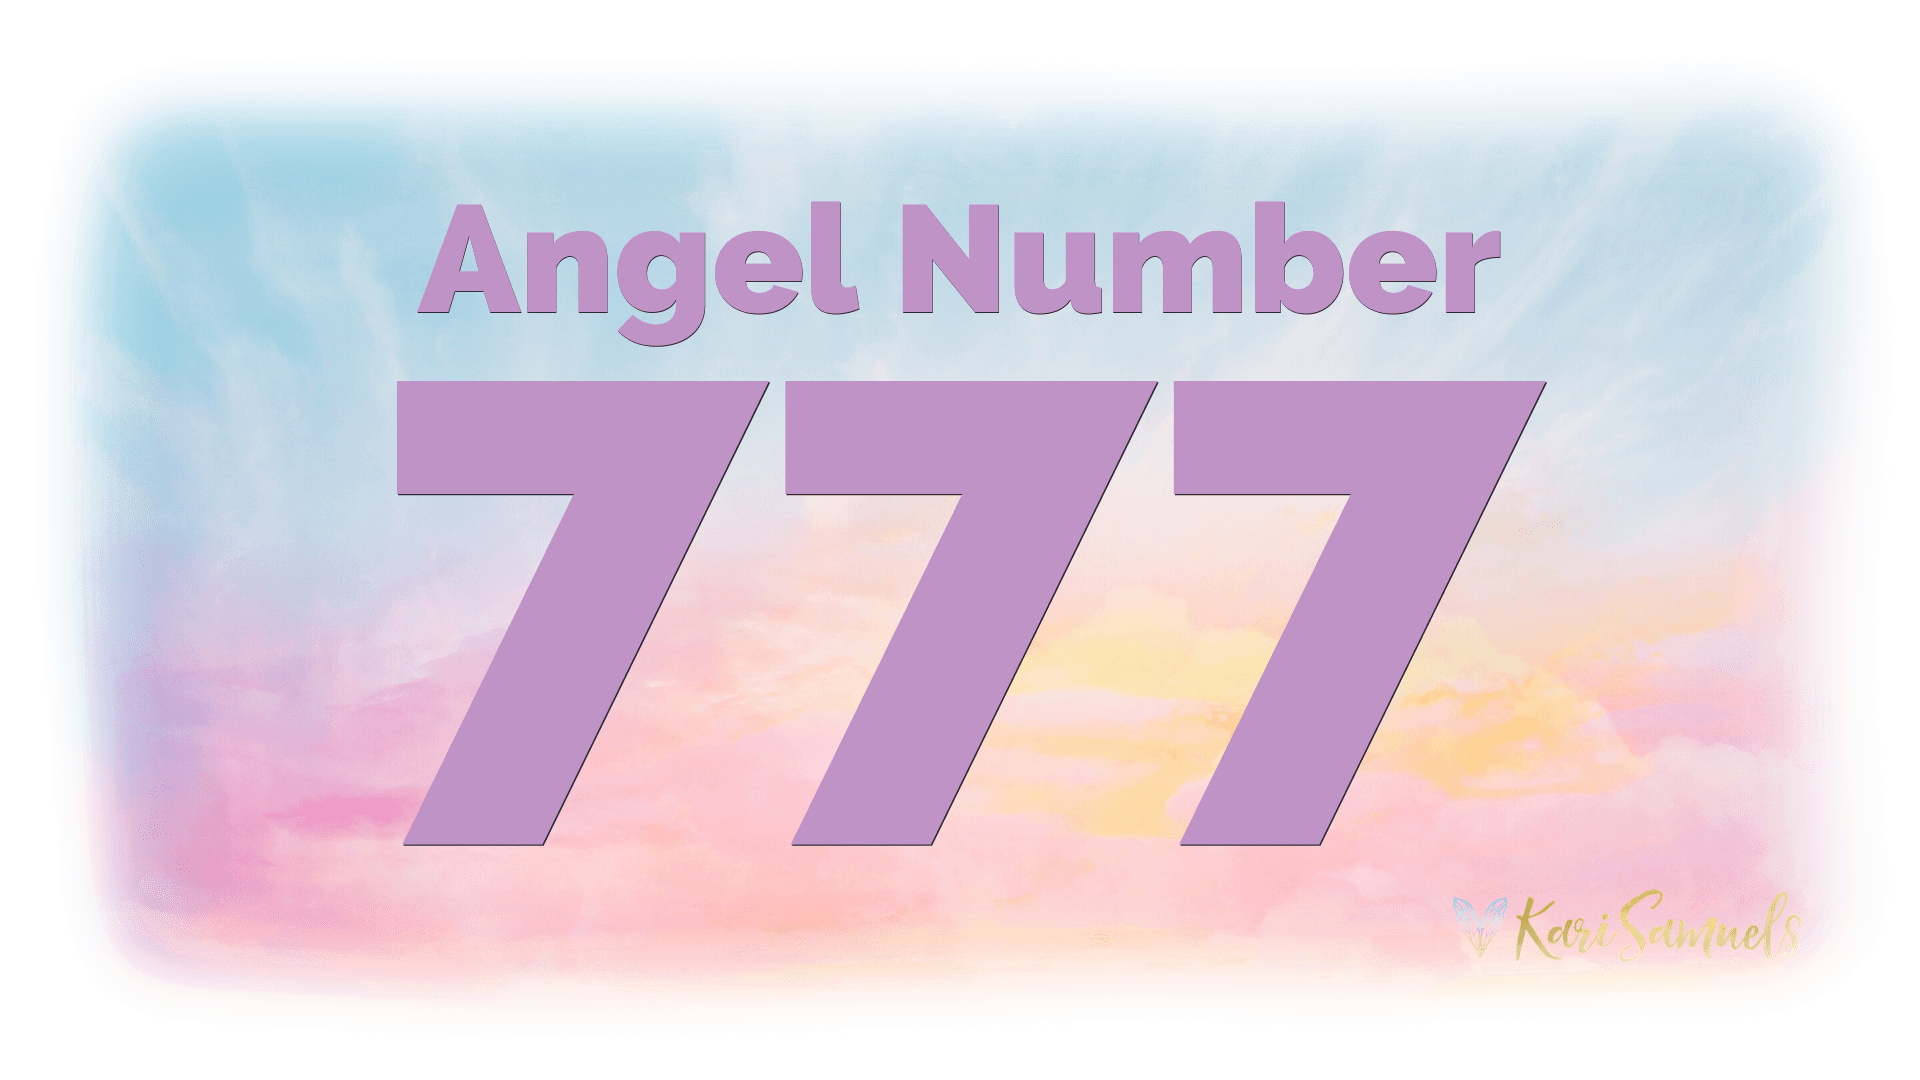 Angel number 777 with hints of yellow, pink, and blue clouds in the back.